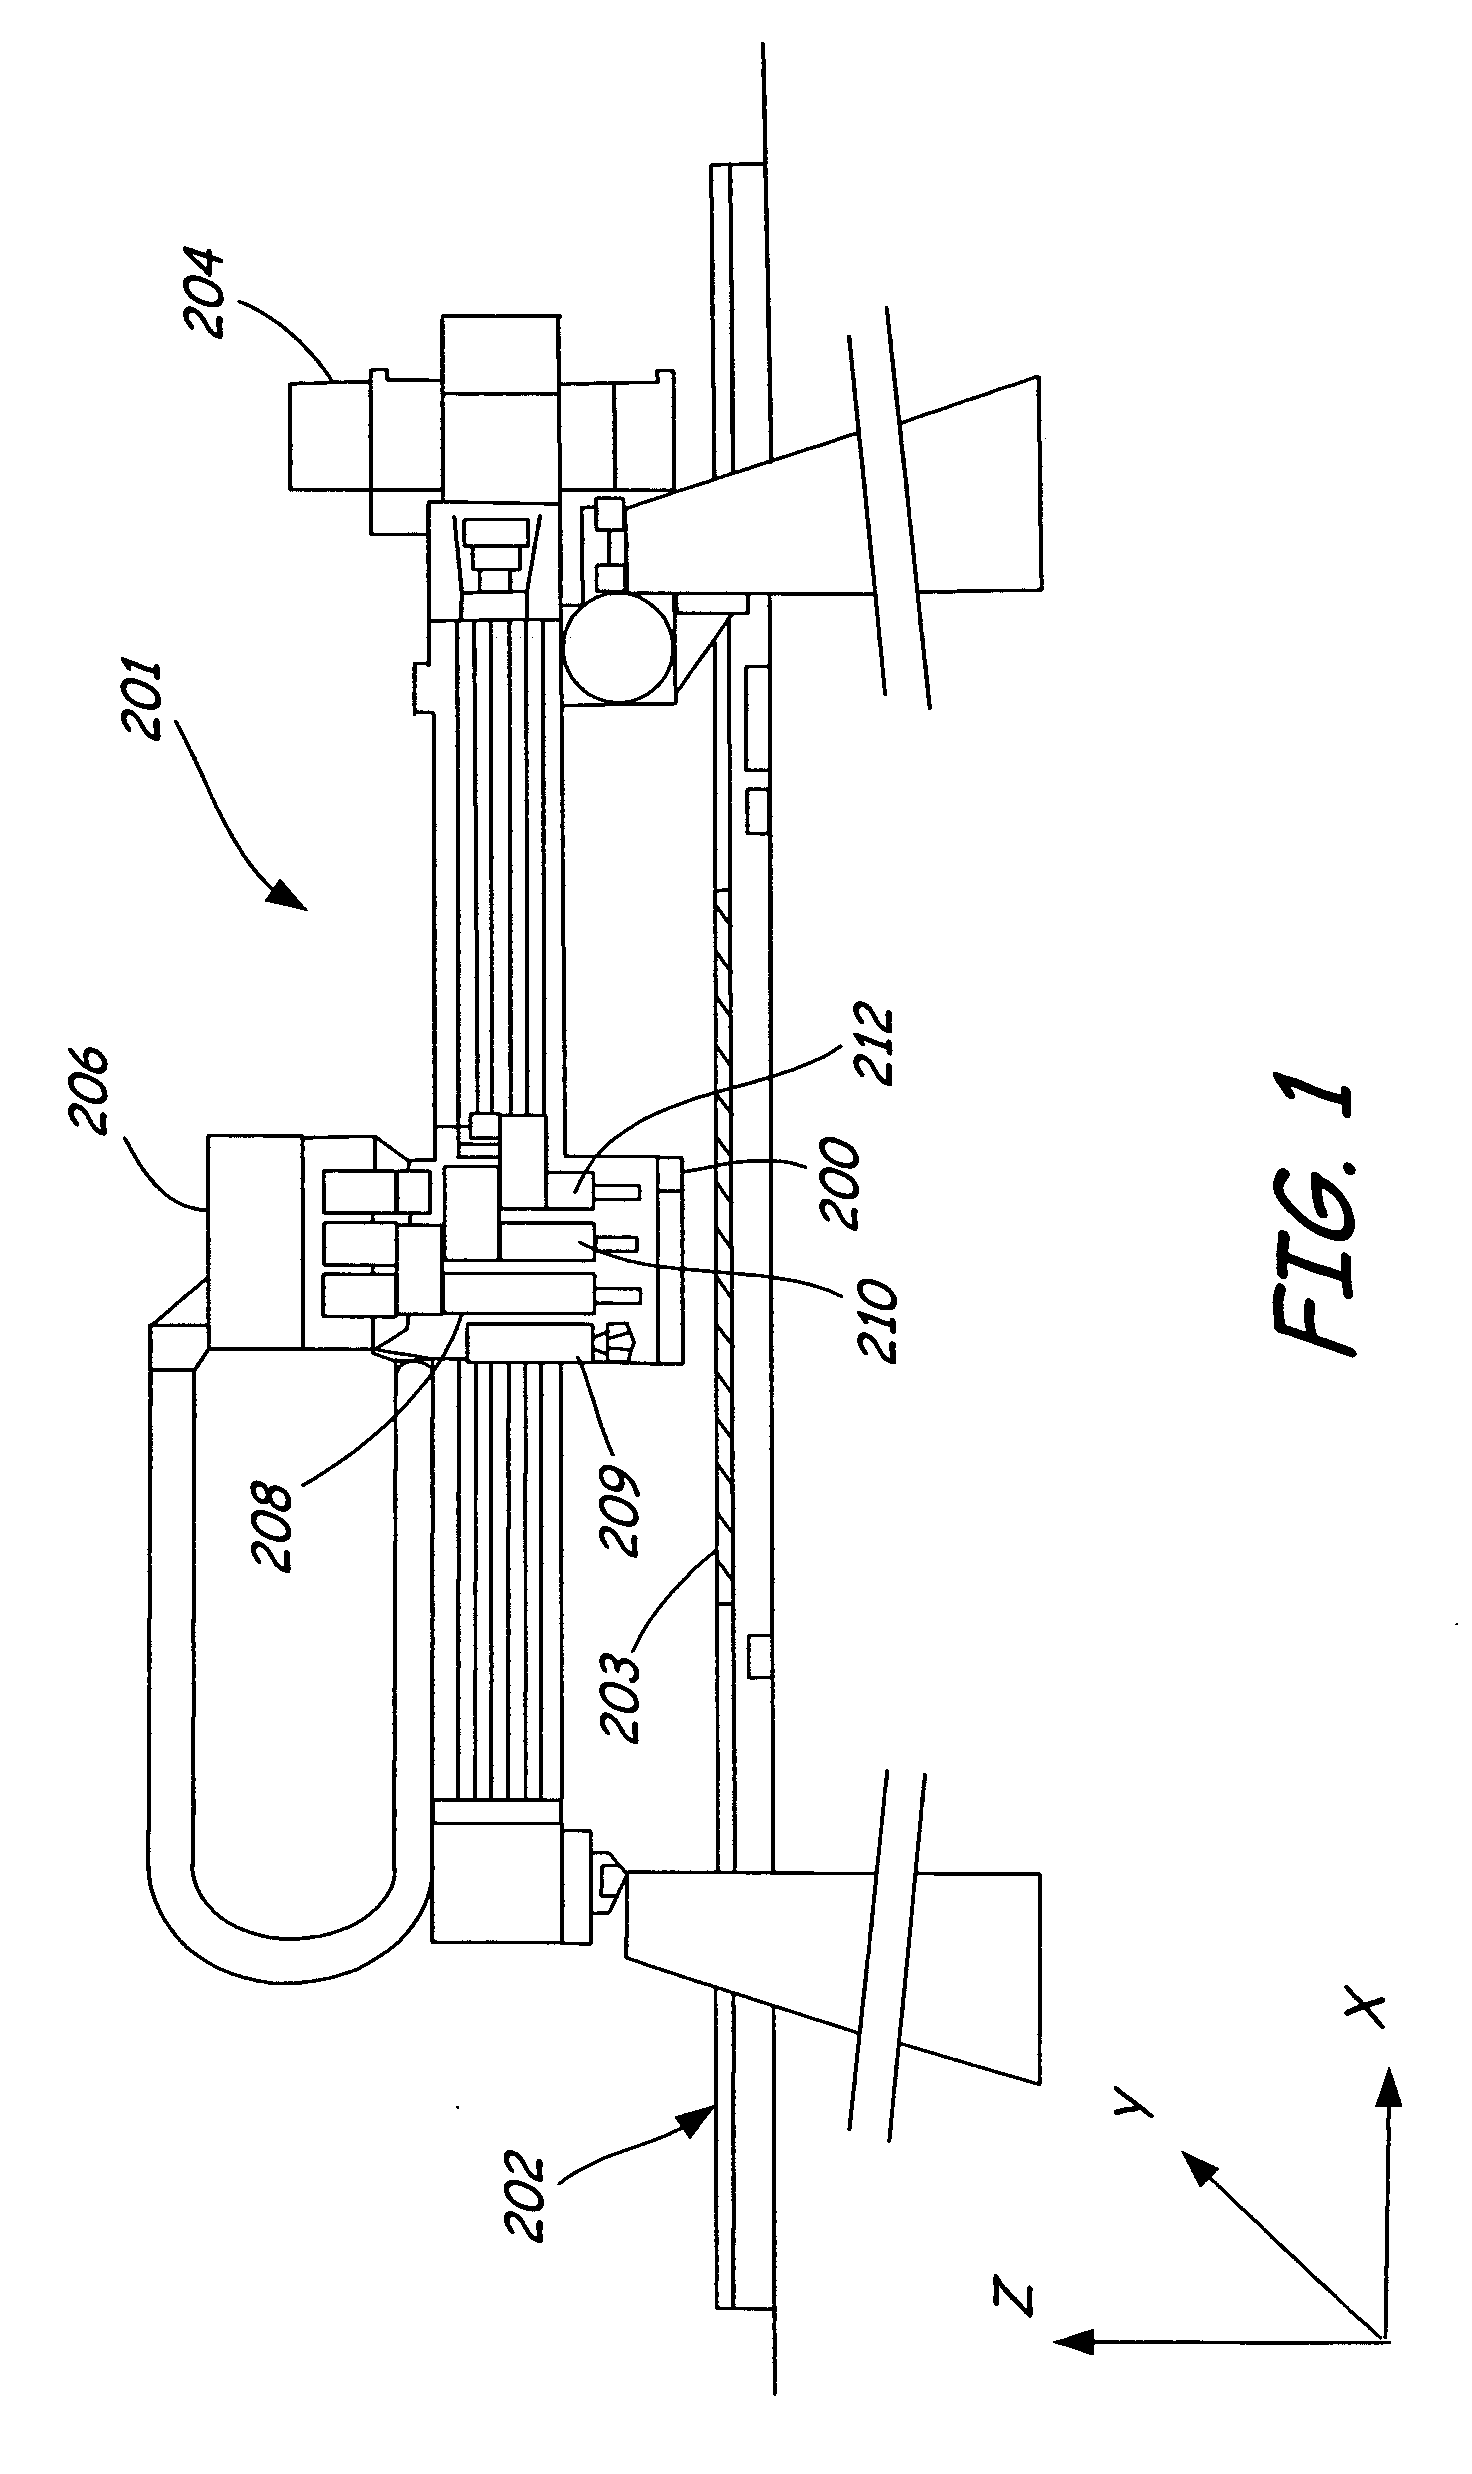 Pick and place machine with component placement inspection